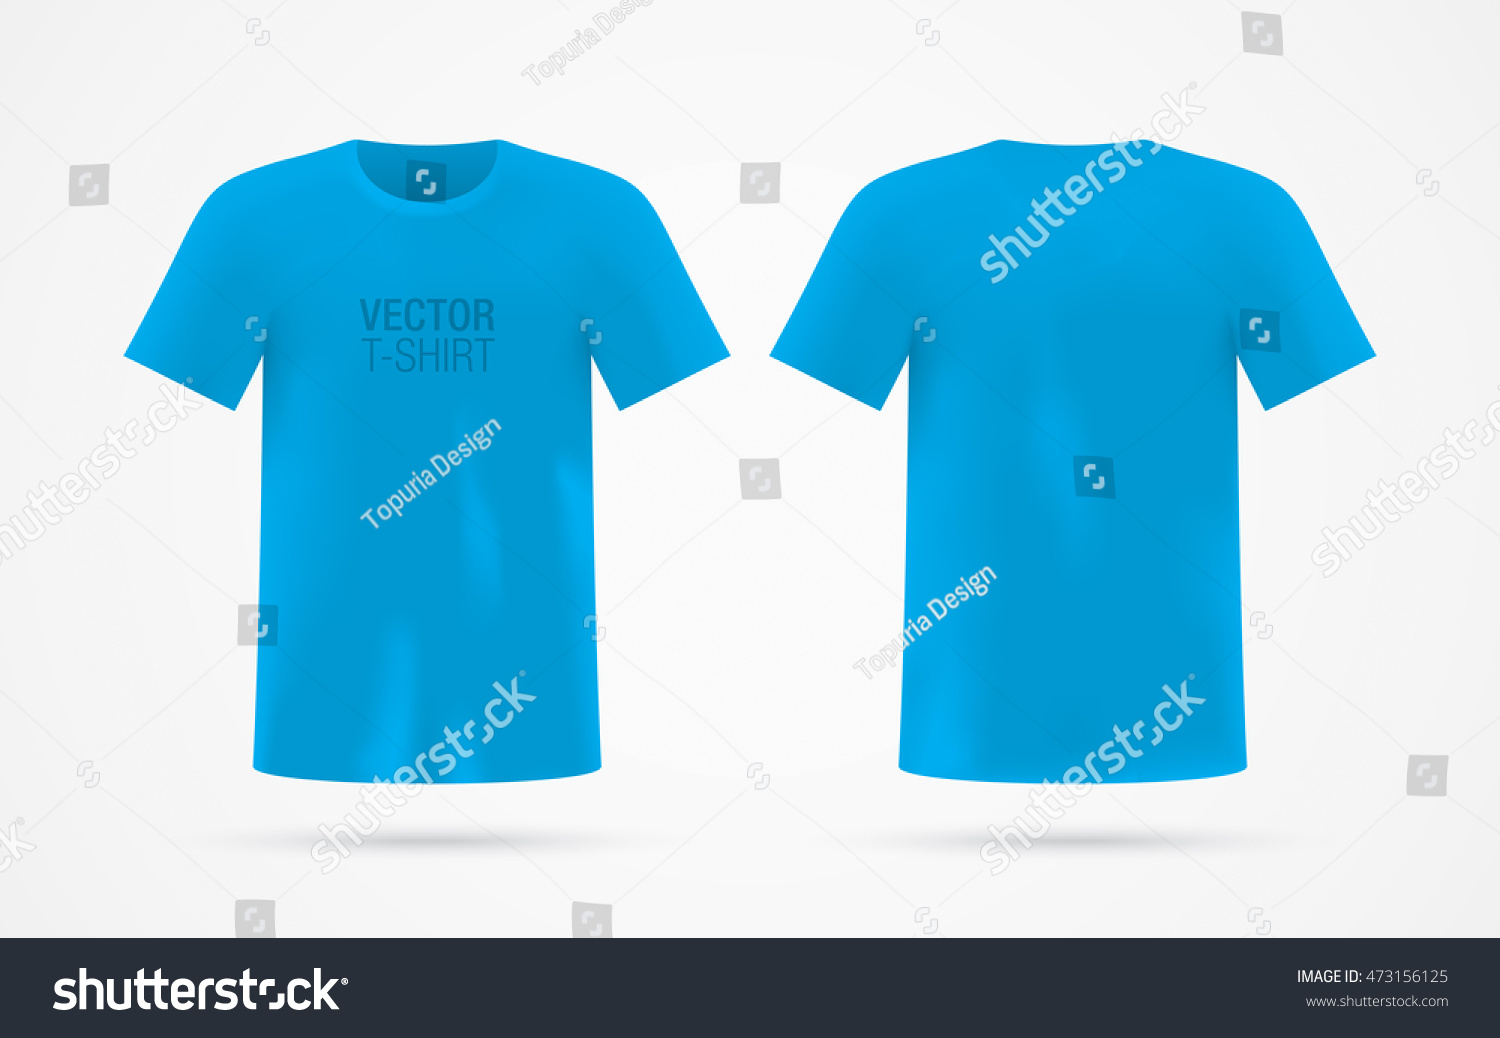 Download Blue Vector Tshirt Template Isolated On Stock Vector ...